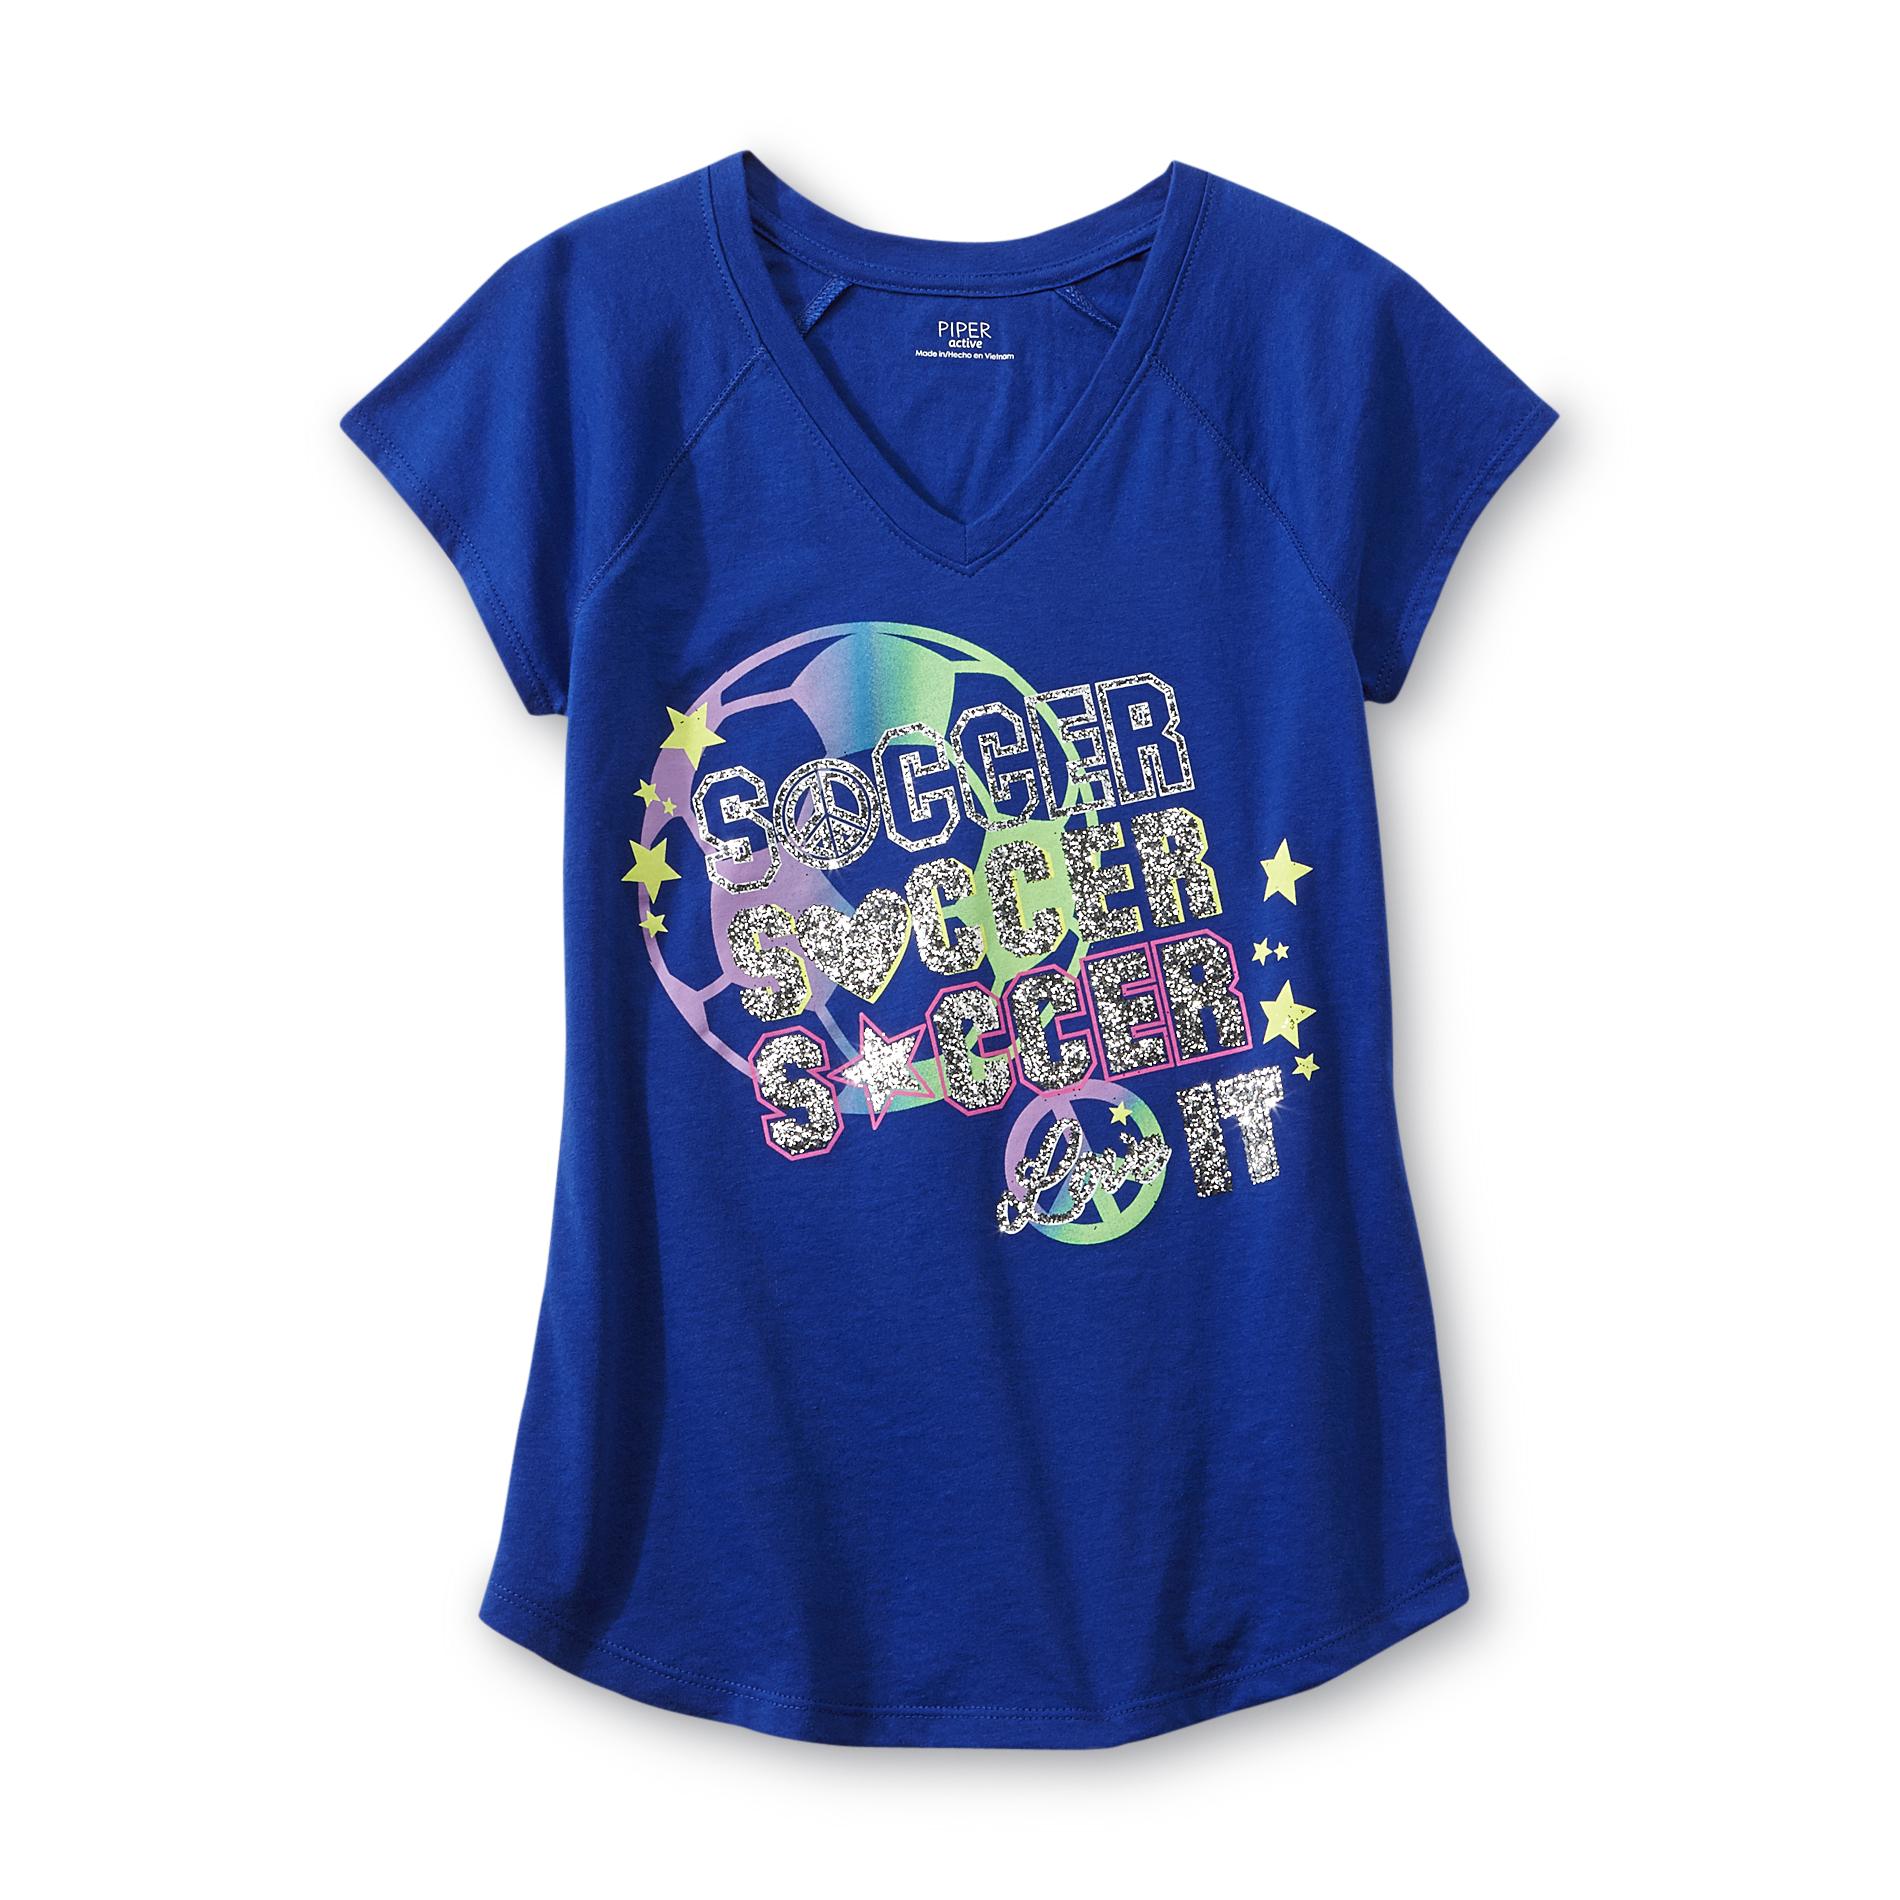 Piper Active Girl's Graphic T-Shirt - Soccer